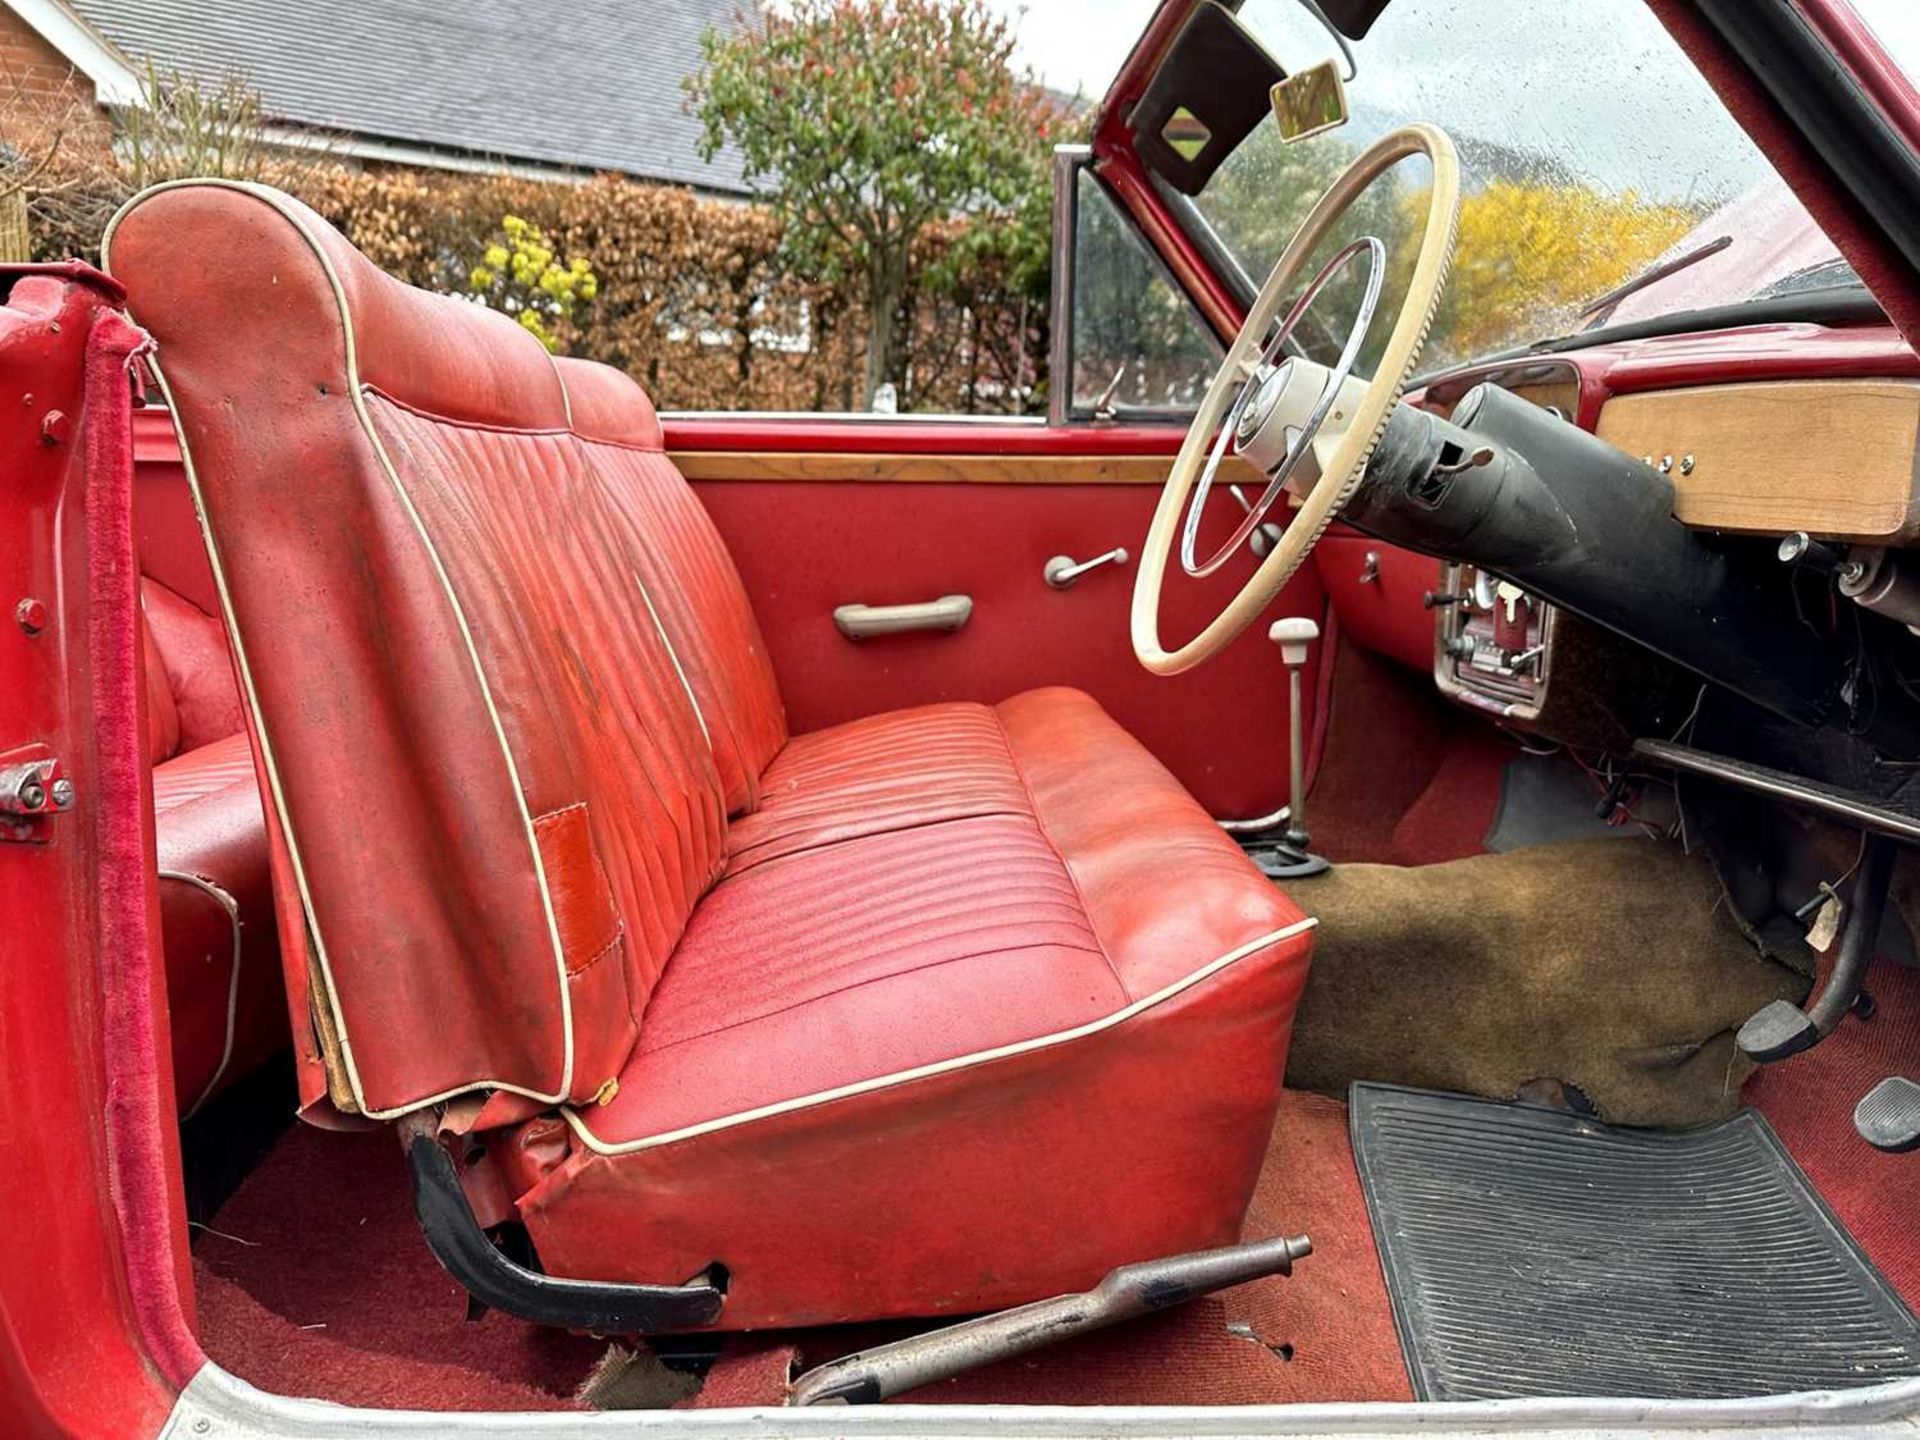 1961 Singer Gazelle Convertible Comes complete with overdrive, period radio and badge bar - Image 43 of 95